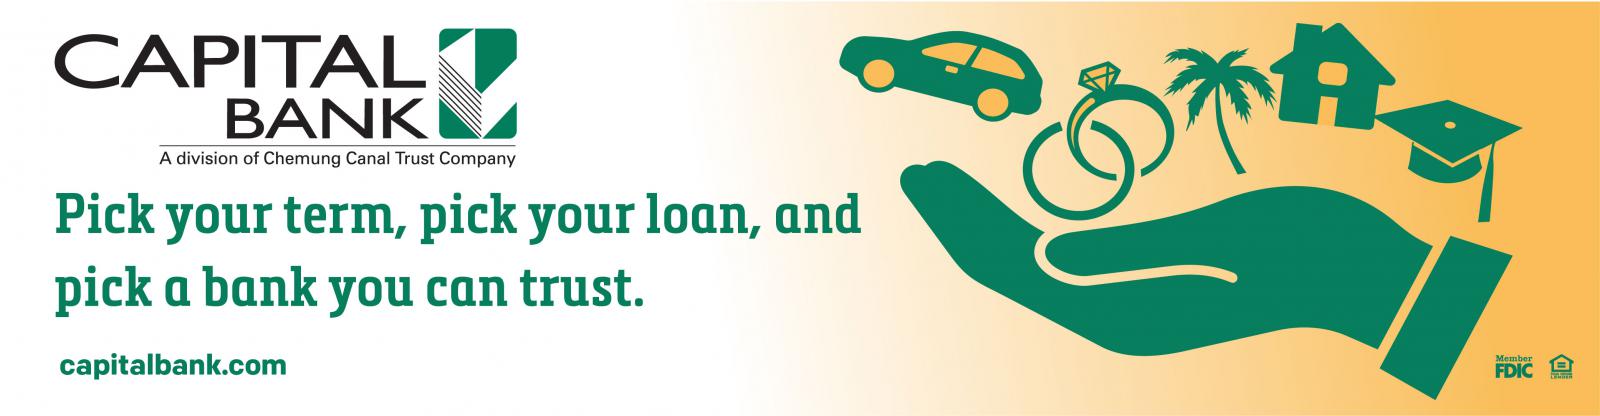 Pick Your Term, Pick Your Loan, and Pick A Bank You Can Trust!